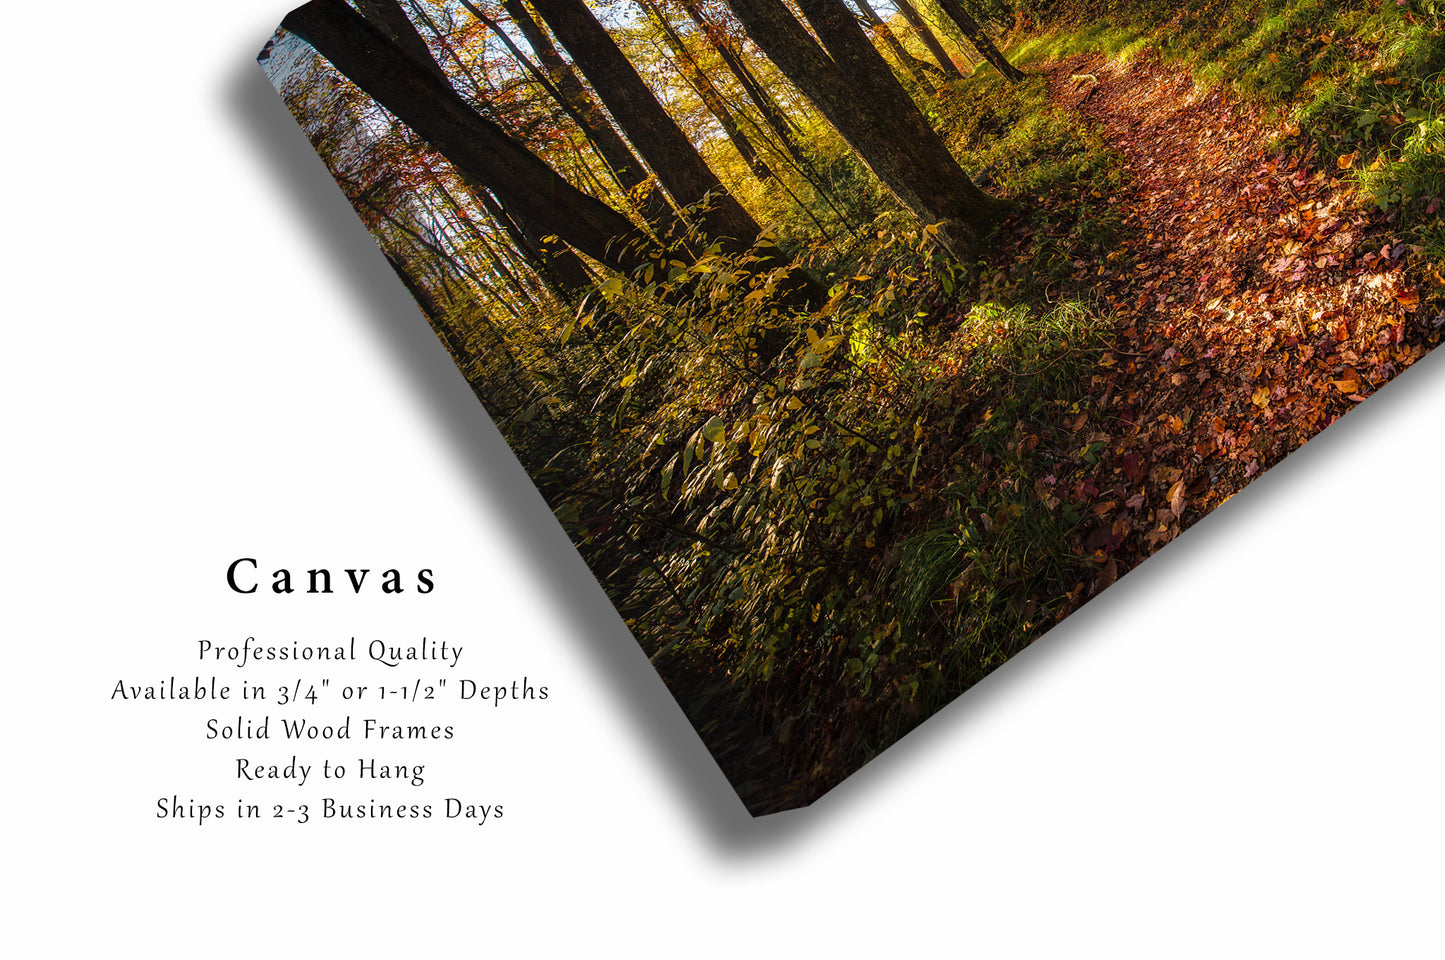 Canvas Wall Art | Hiking Trail Leading to Forest Picture | Great Smoky Mountains Gallery Wrap | Tennessee Photography | Nature Decor